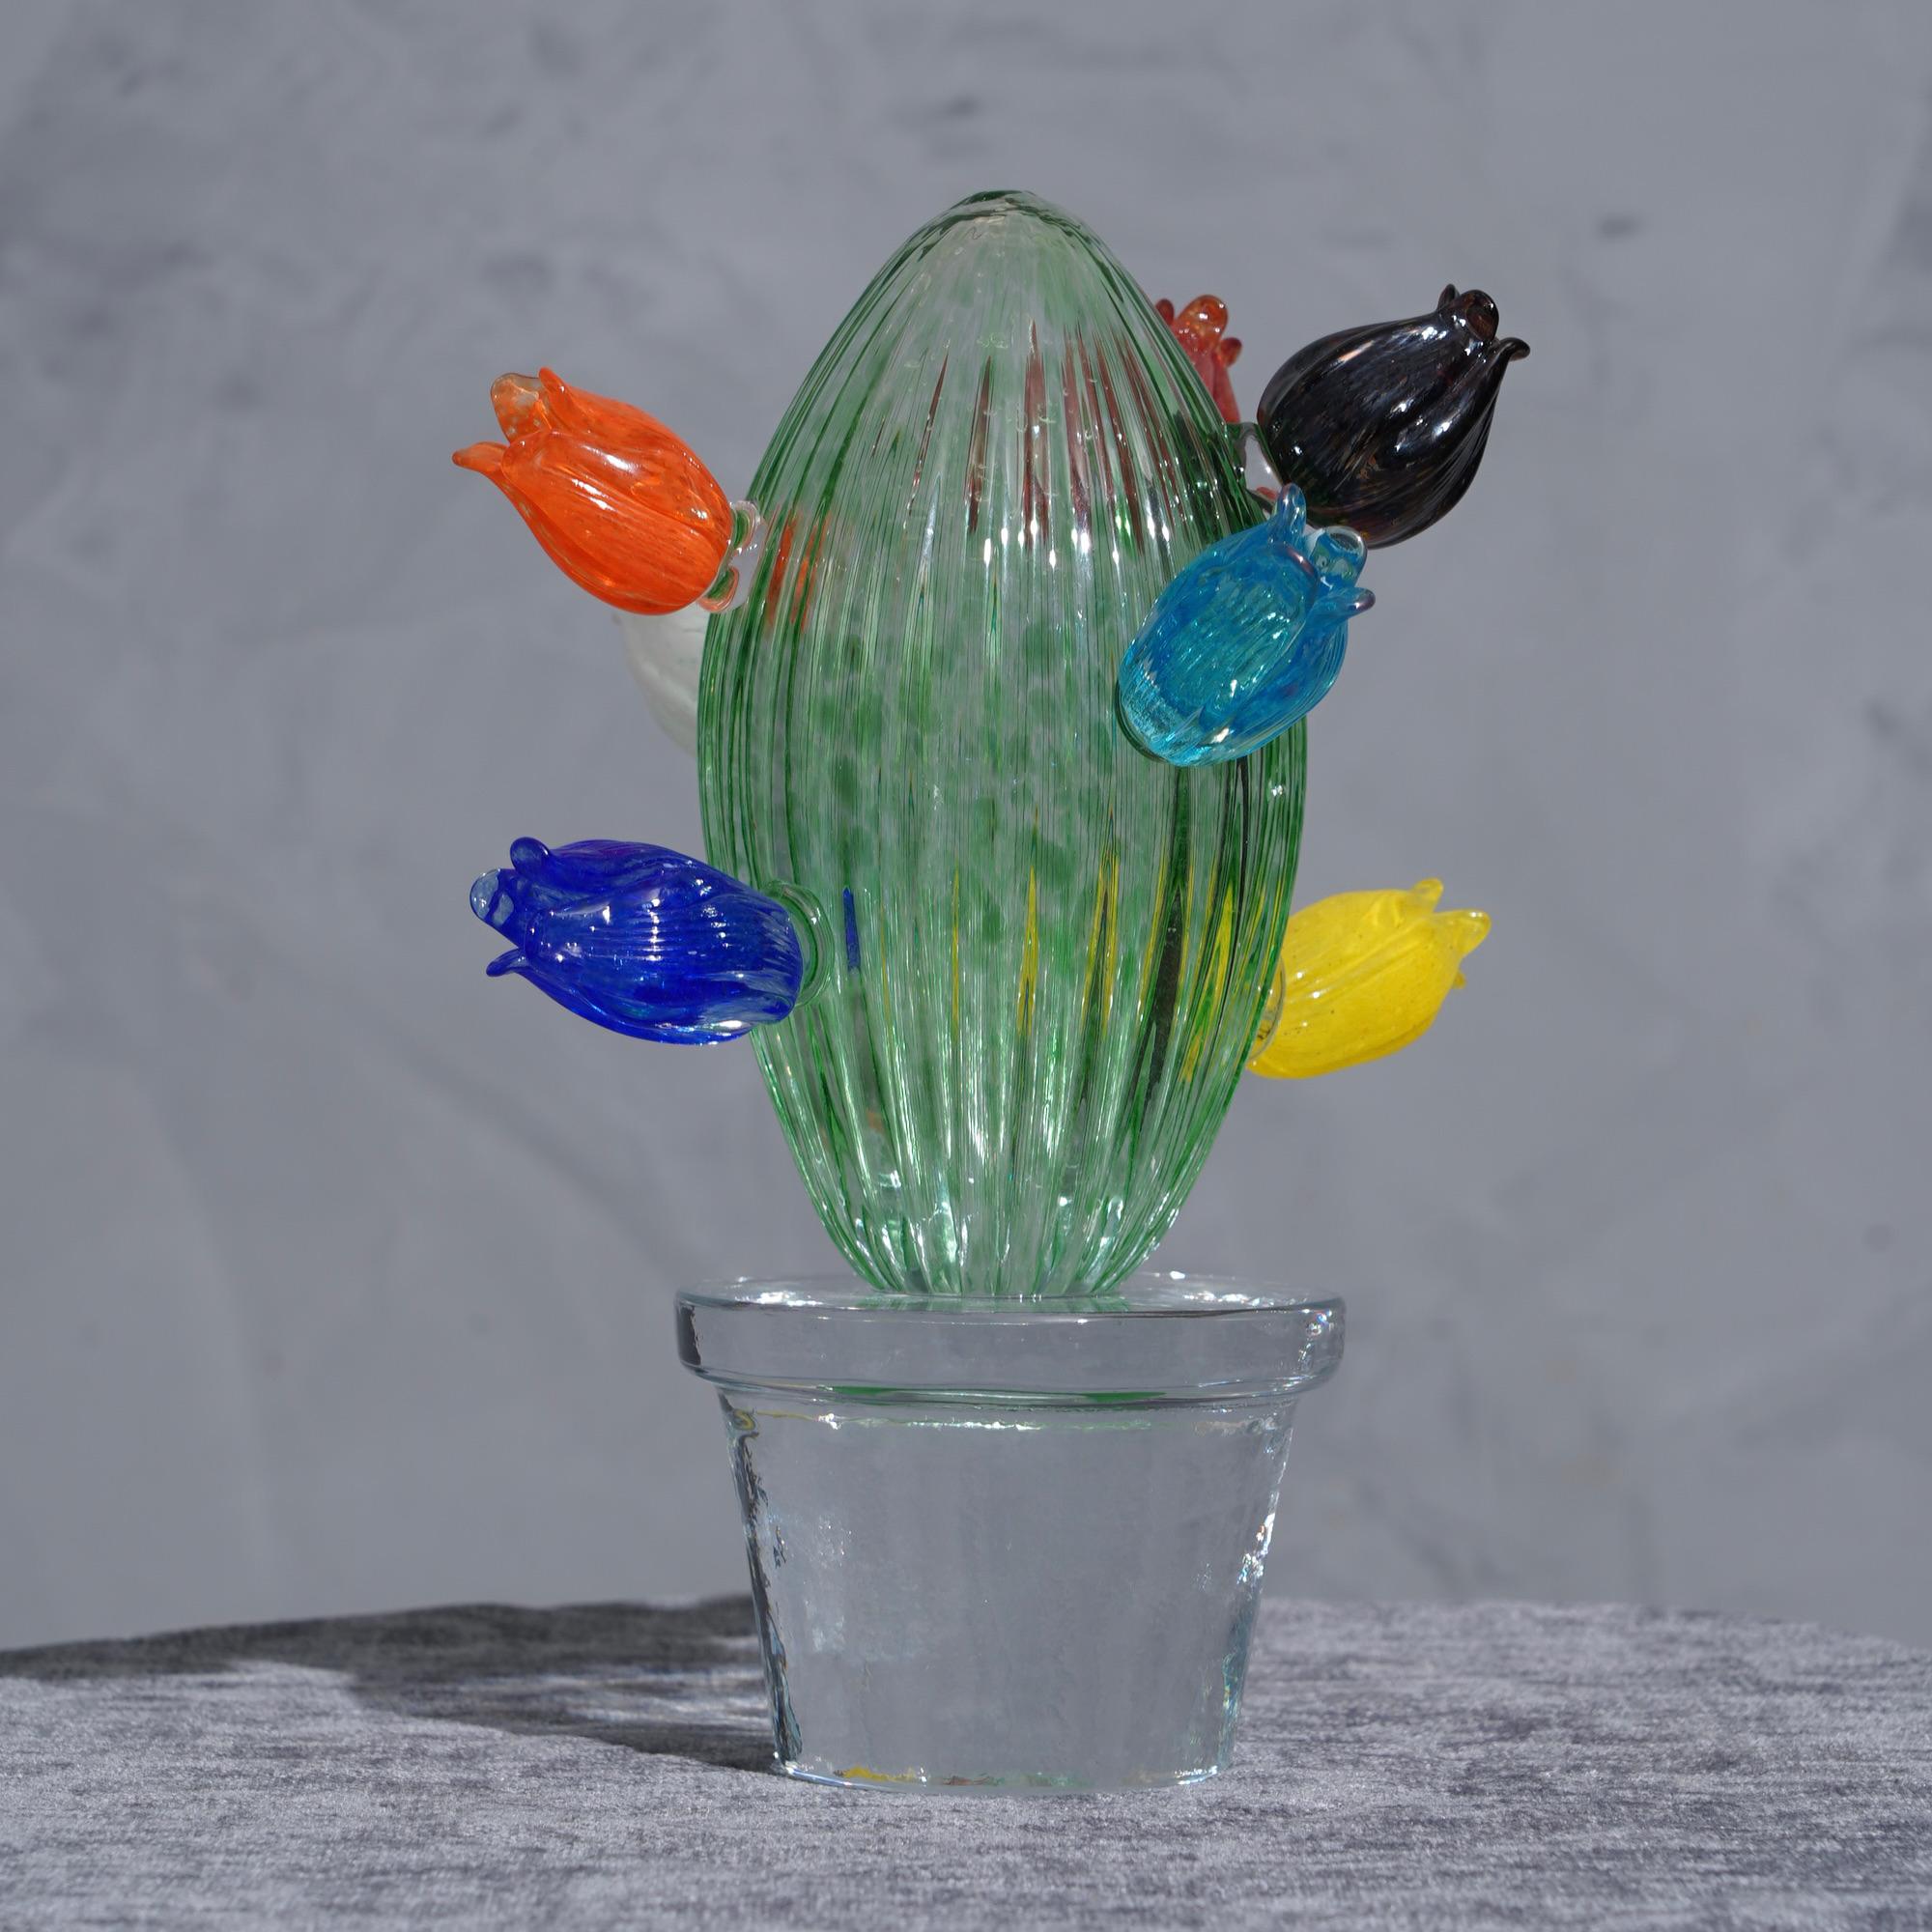 Italian design by Marta Marzotto creator of style, this cactus is a fashion icon of the Italian style, emerald green with a beautiful clear glass vase underneath.

In limited edition, as can be seen from the writing under the transparent vase